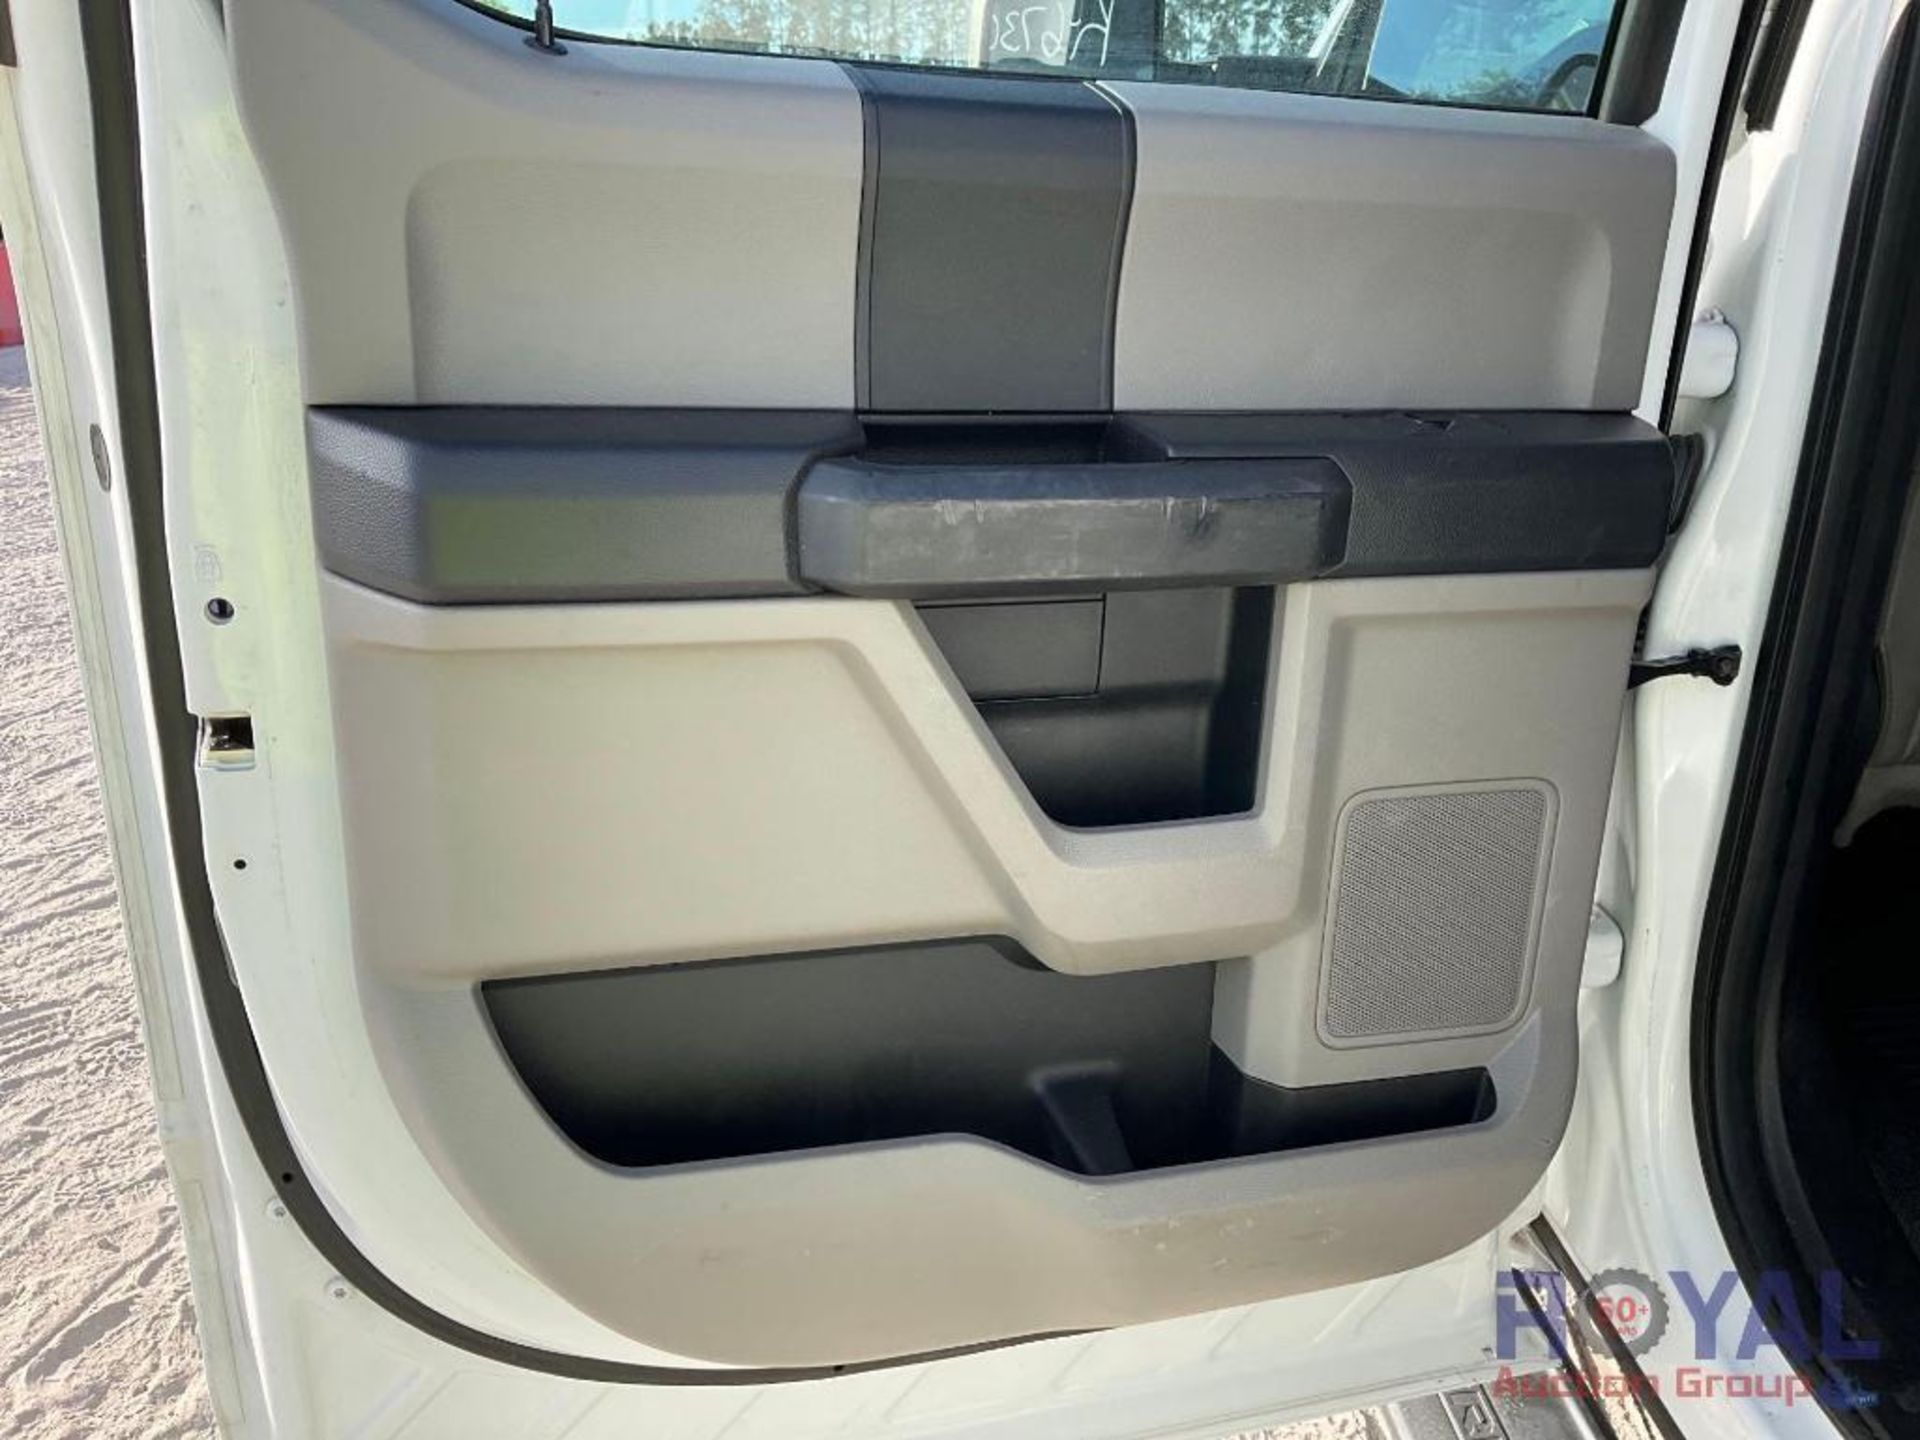 2019 F450 4x4 Service Truck - Image 22 of 34